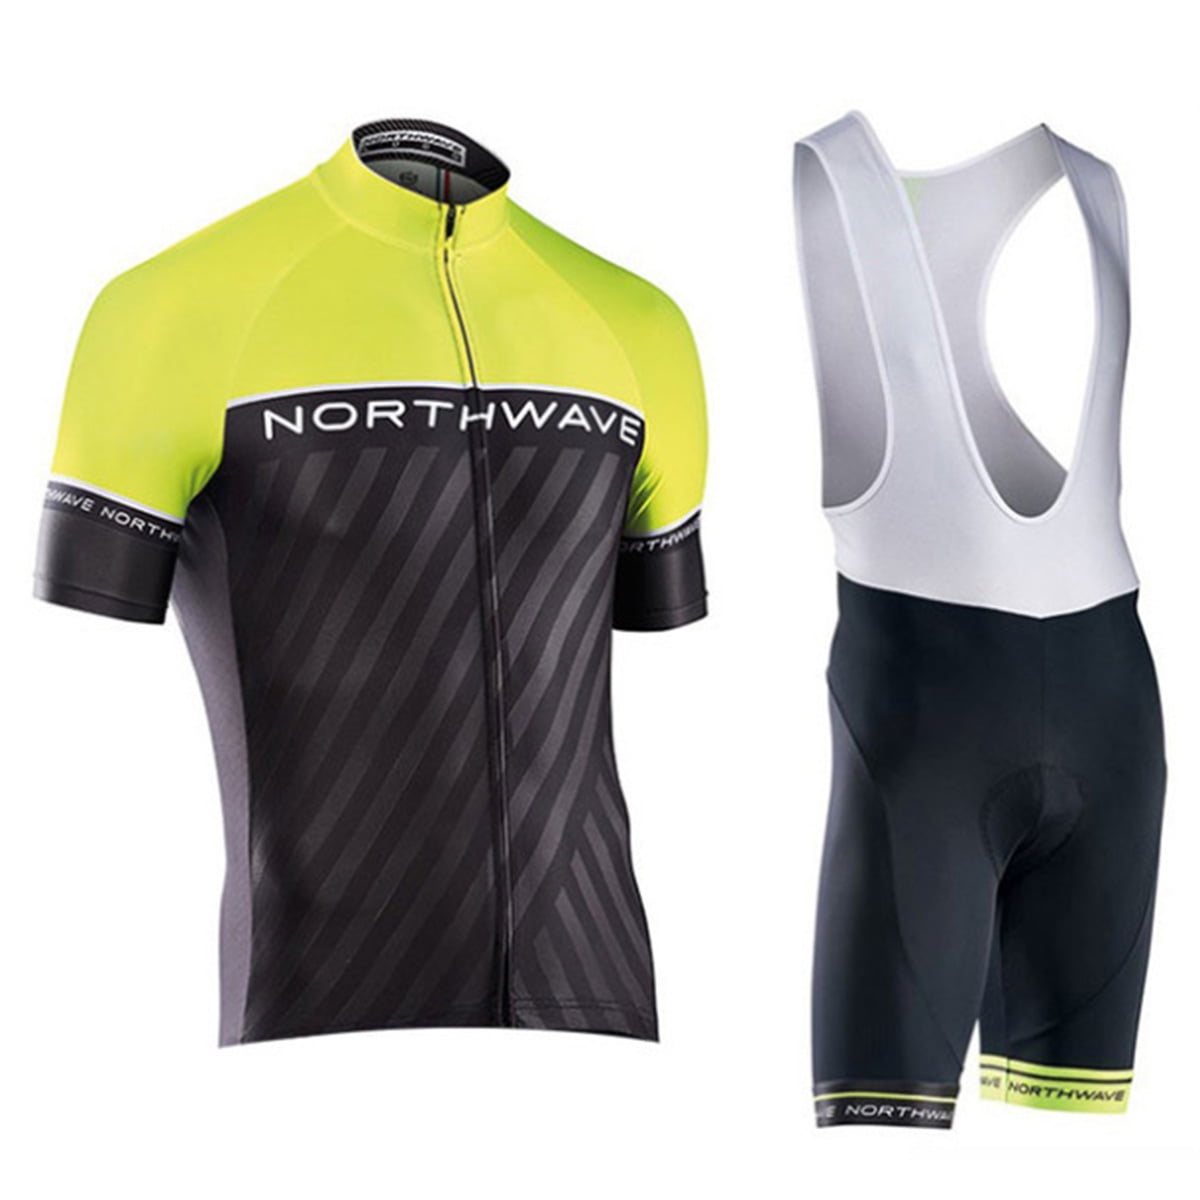 NORTHWAVE STEEL LONG SLEEVE CYCLING JERSEY LARGE UK P&P FREE 